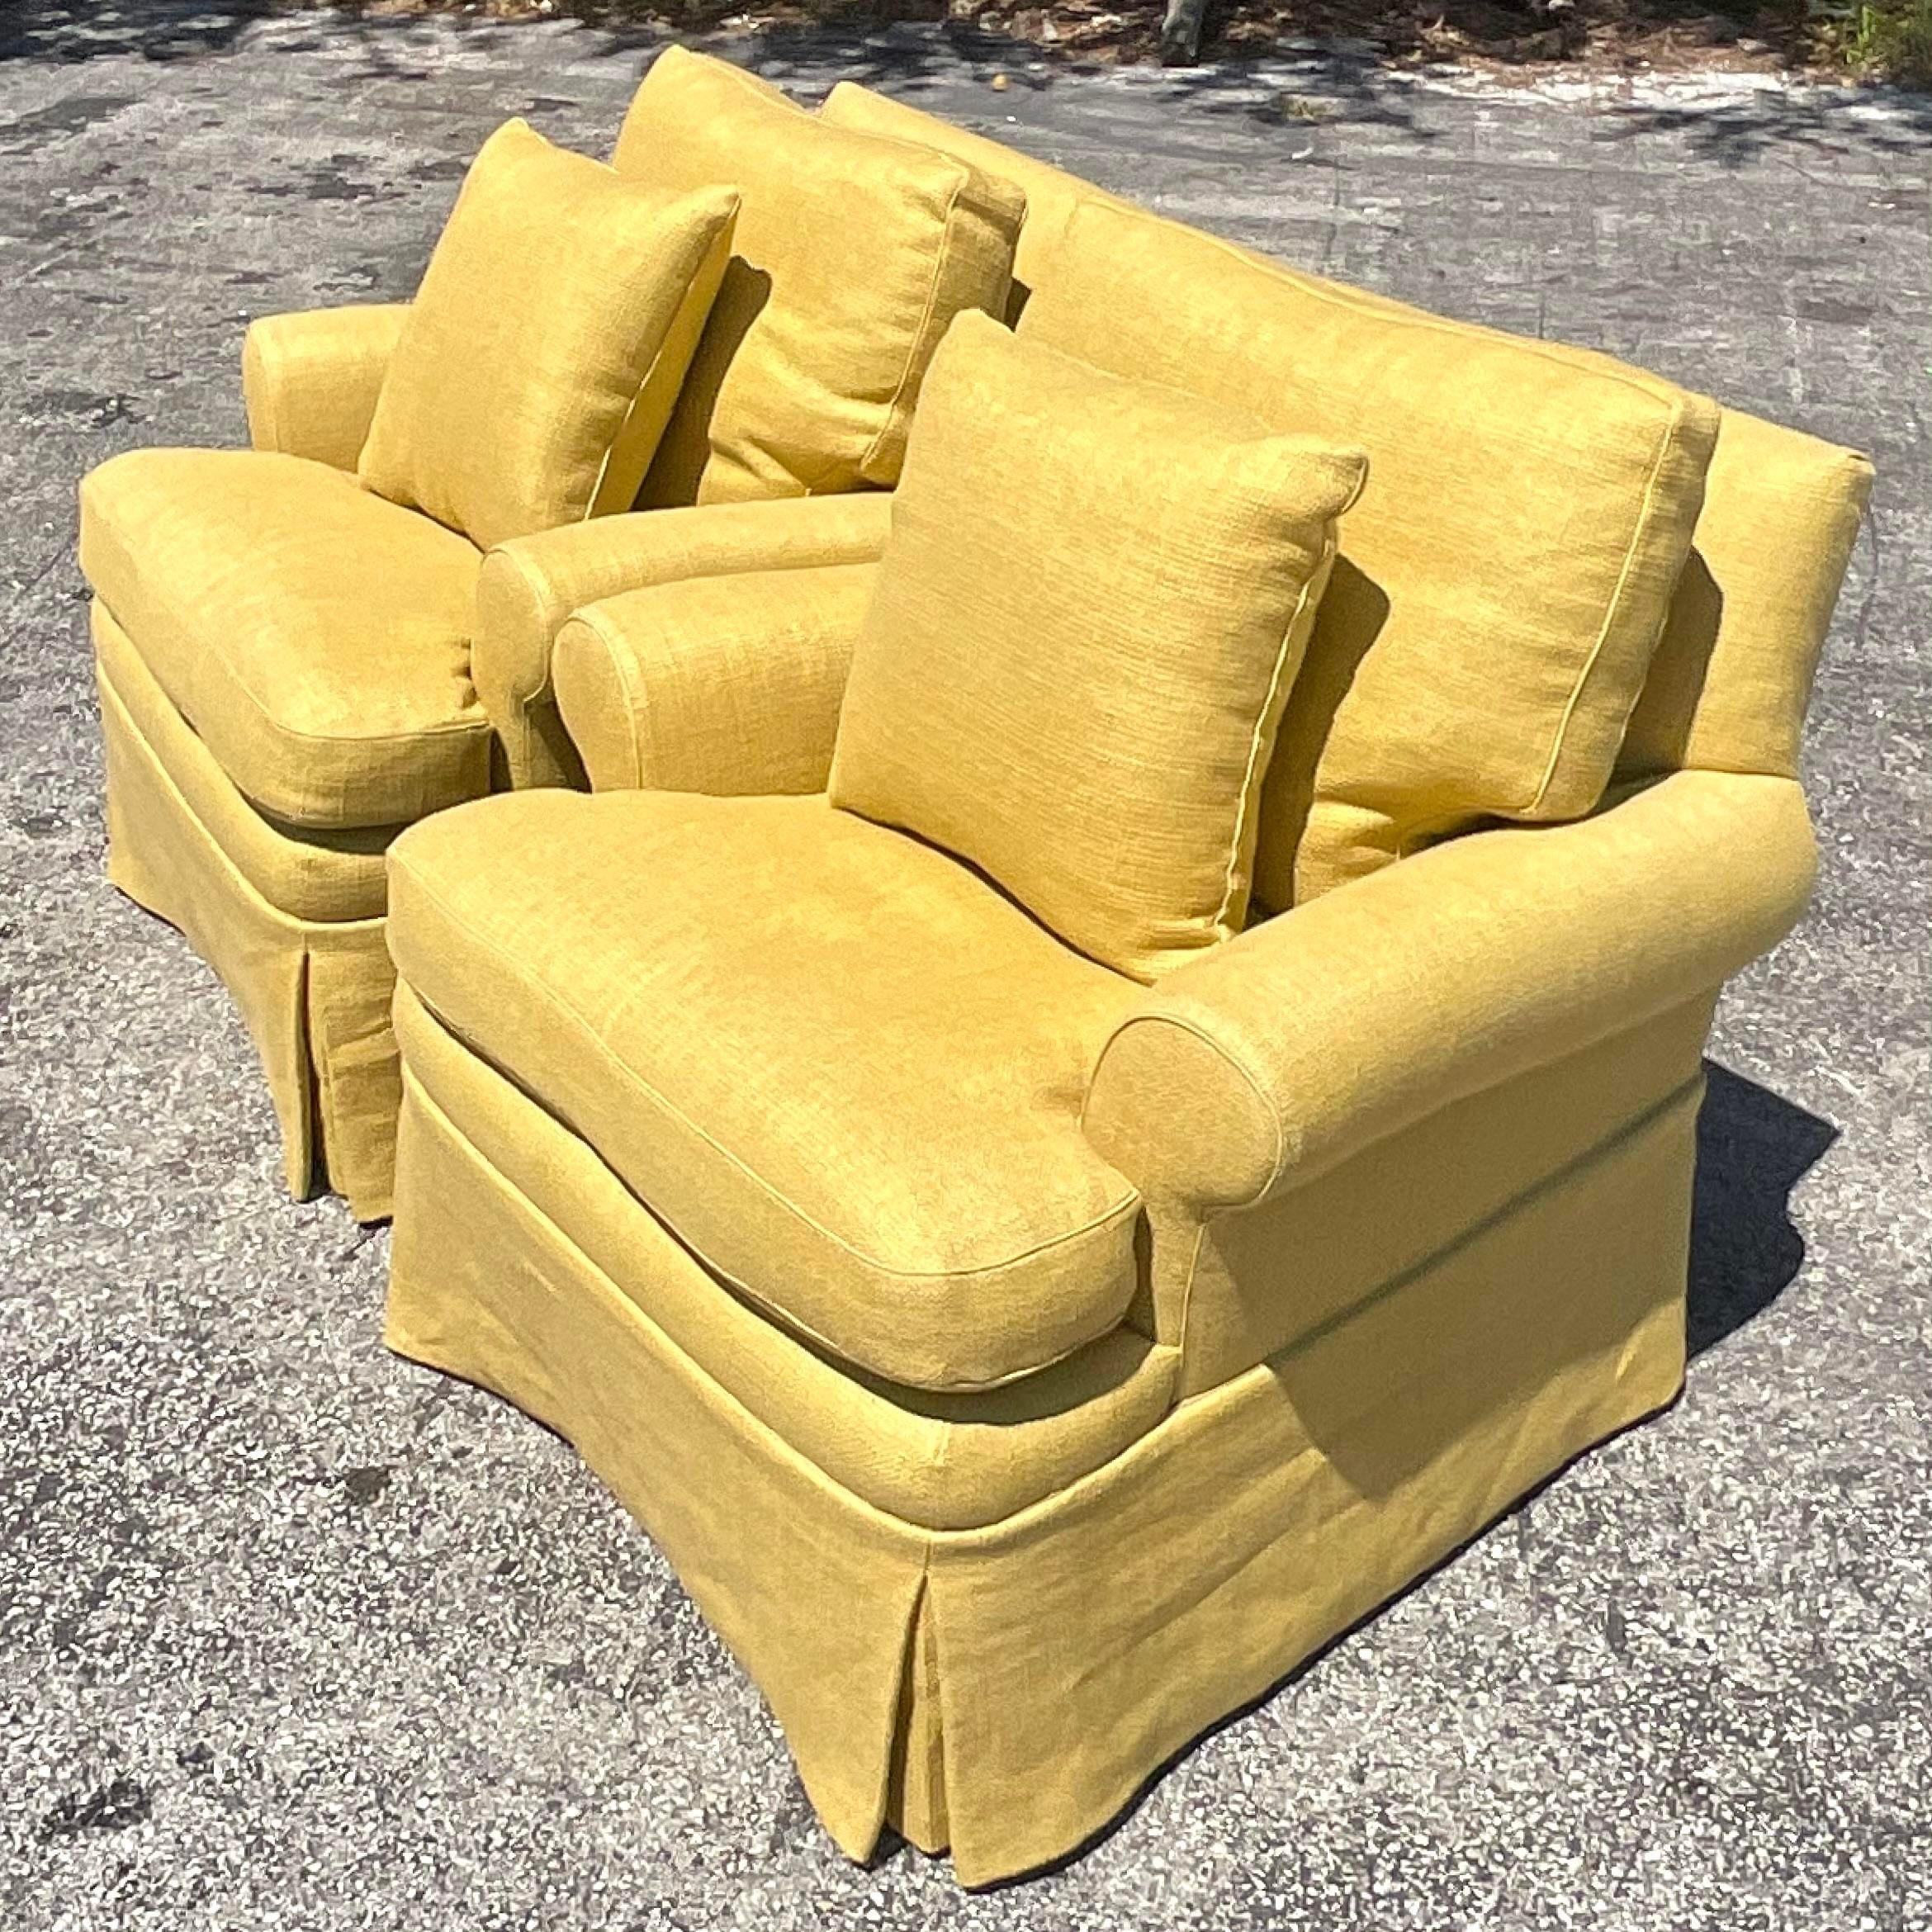 American Vintage Regency Chartreuse Down Lounge Chairs - a Pair For Sale